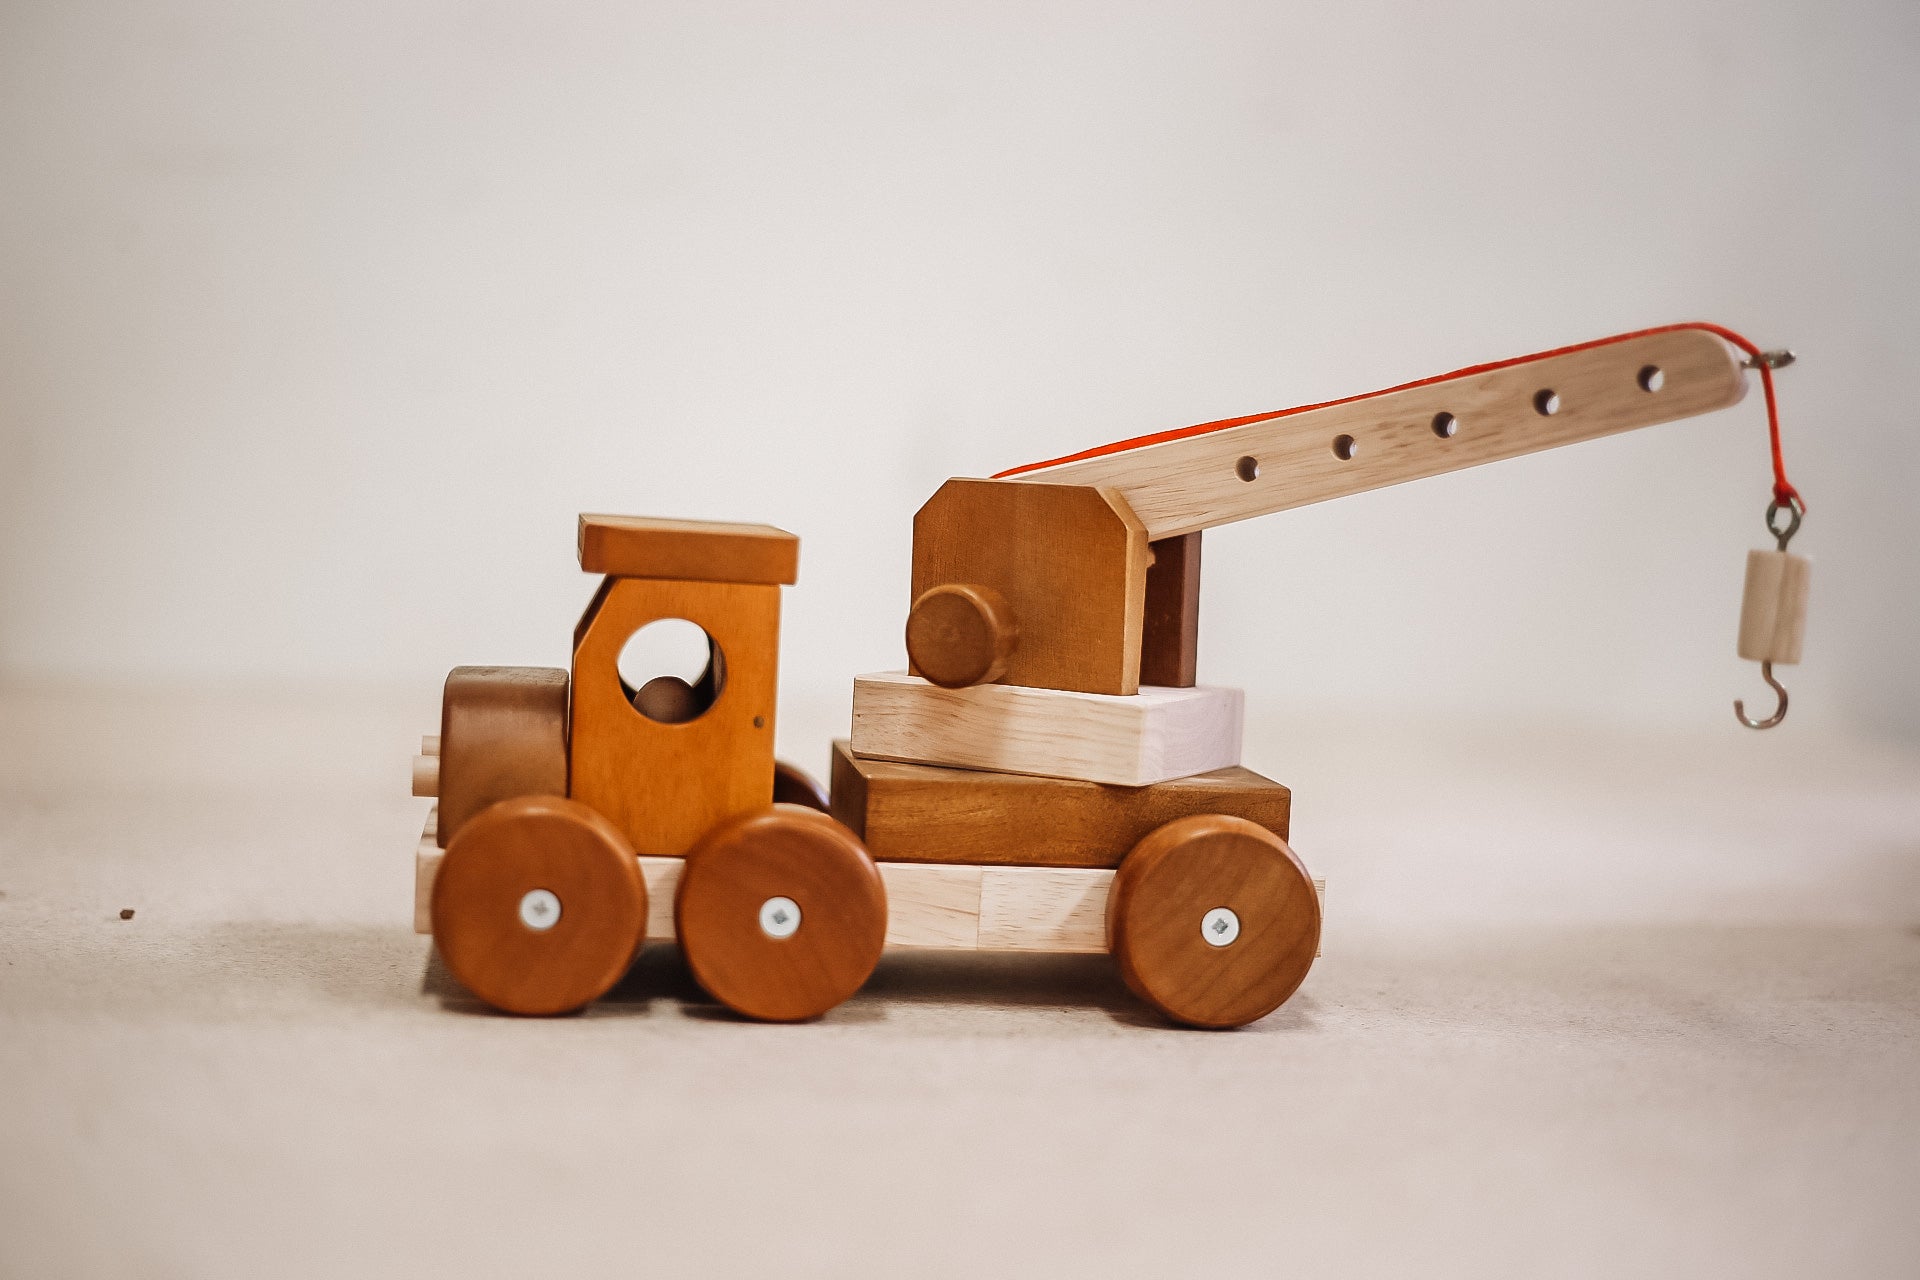 Wooden crane from QToys with hook on end of moving crane